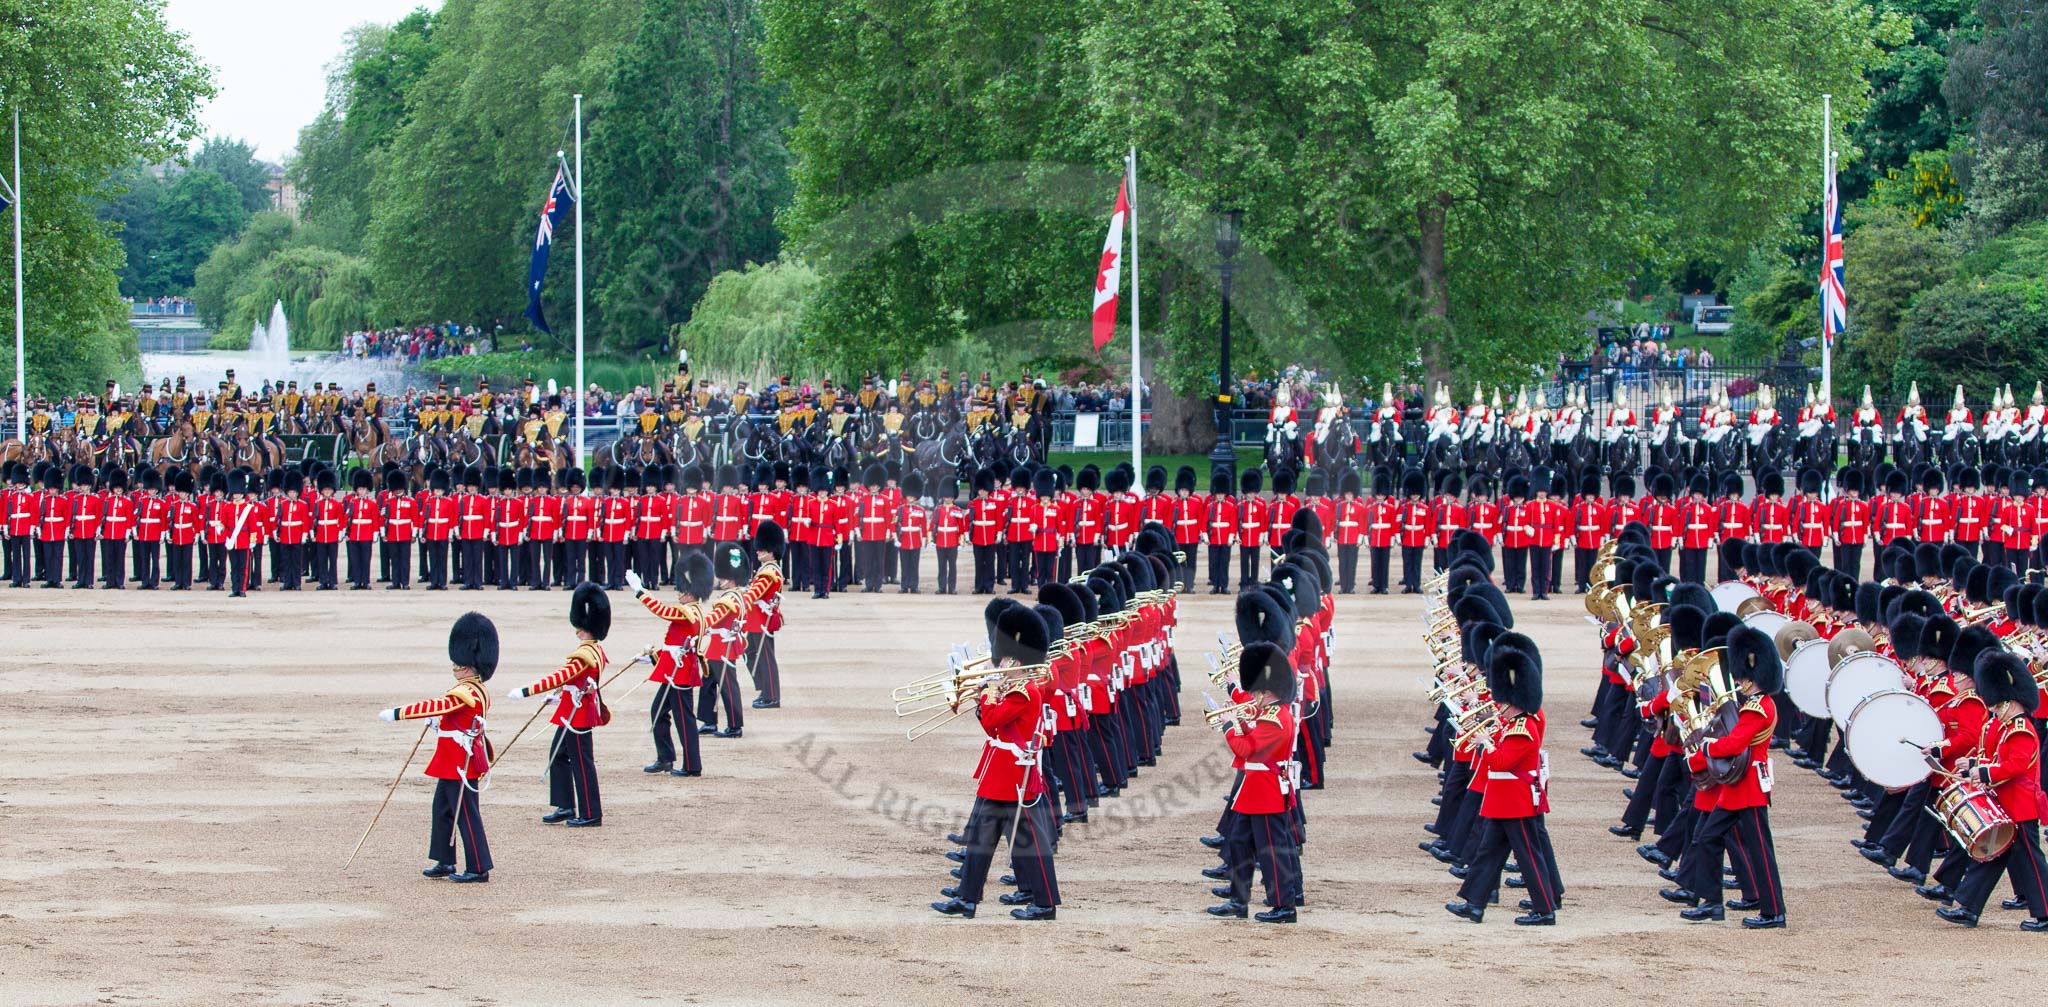 Major General's Review 2013: The Massed Band Troop - the final stages of the countermarch. No. 1 Guard, the Escort for the Colour, is to the right of the musicians. Behind them The King's Troop Royal Horse Artillery.First and Second Divisions of the Sovereign's Escort, Household Cavalry behind No.2 Guard..
Horse Guards Parade, Westminster,
London SW1,

United Kingdom,
on 01 June 2013 at 11:11, image #337